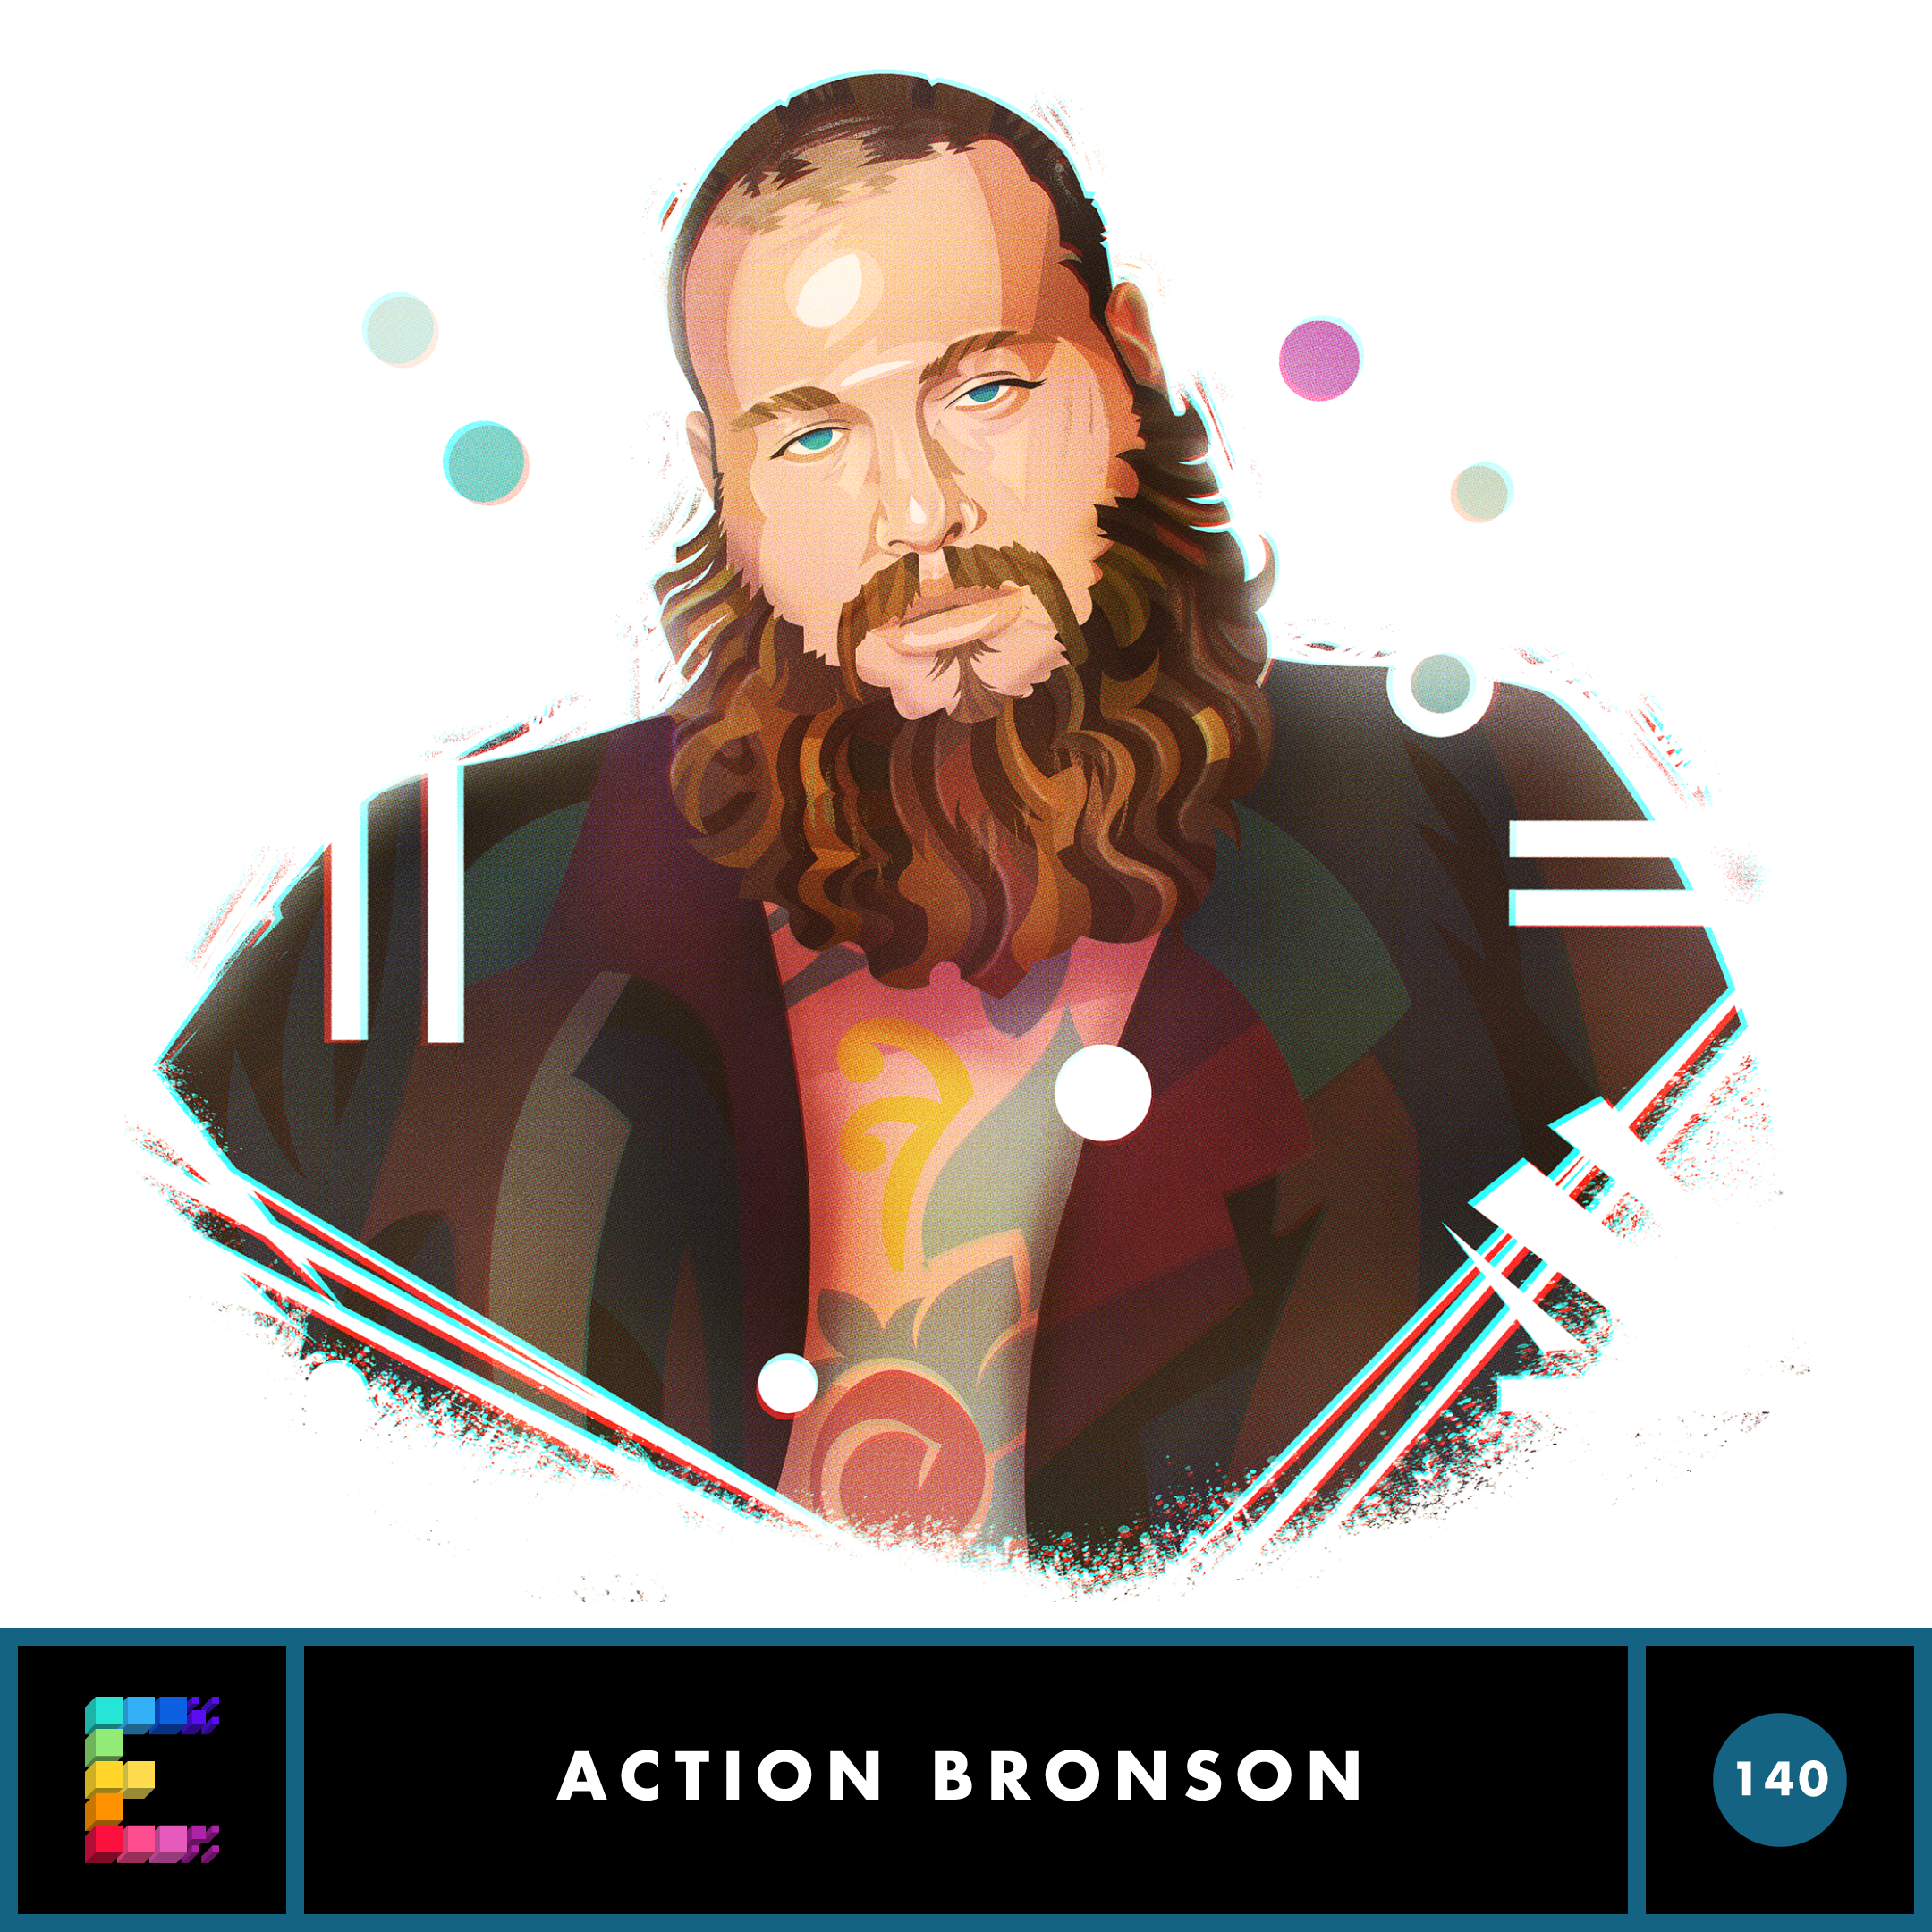 Action Bronson - The Chairman’s Intent